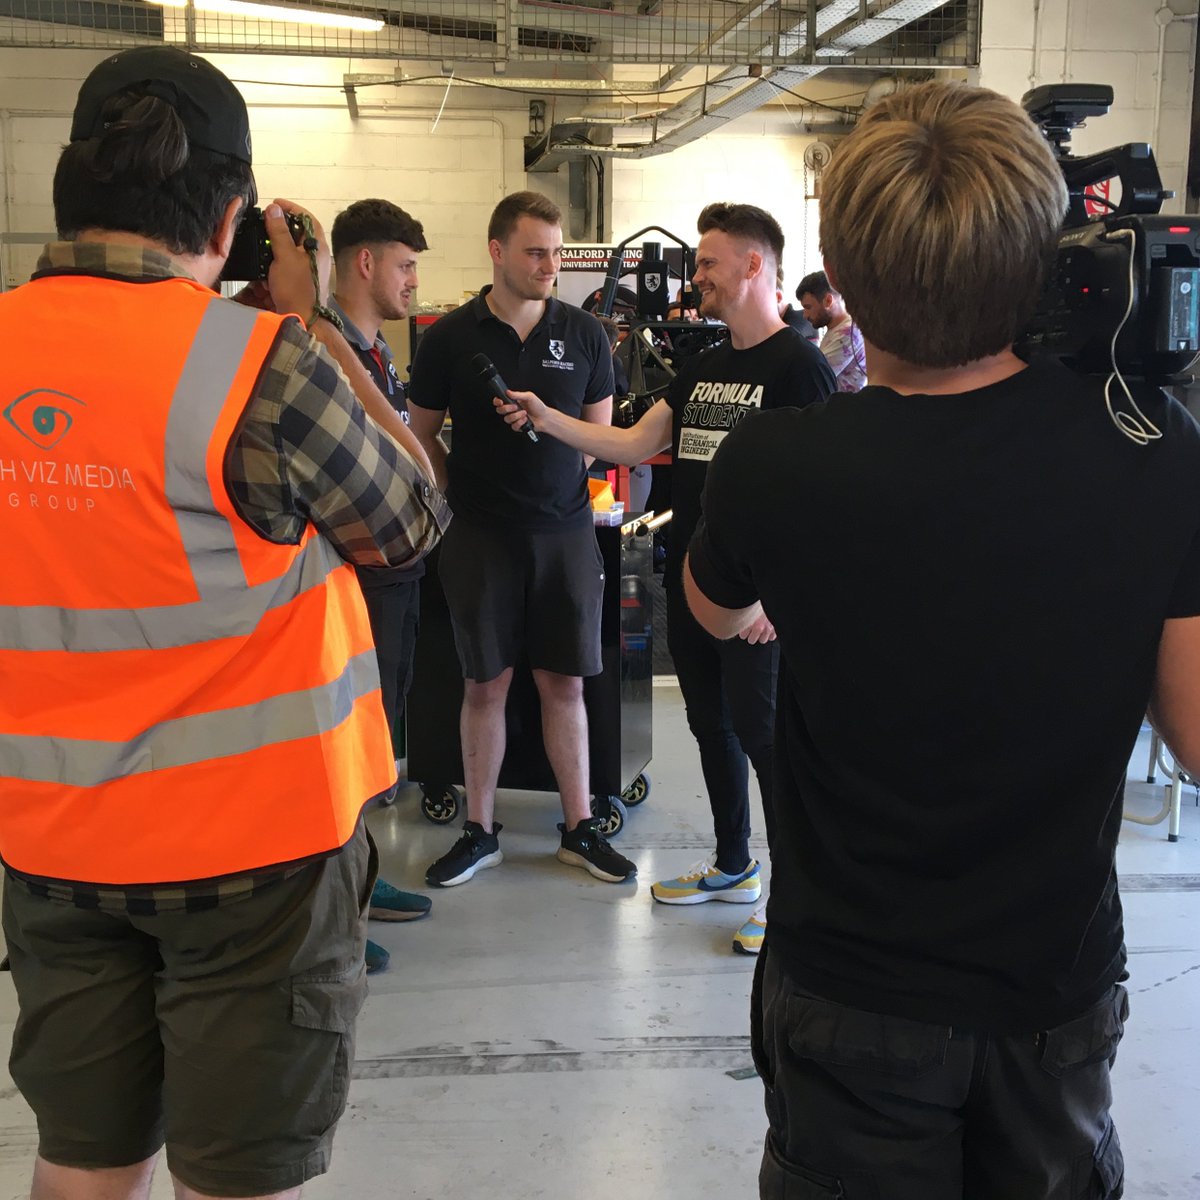 Last week we were at Silverstone supporting @SalfordRacing at #FS22! They built a great car this year and met their goal of passing the Tech, Safety & Chassis sections of scrutineering. Thanks to all the sponsors, especially @MorsonProjects and @pdc_racing who came to the event!